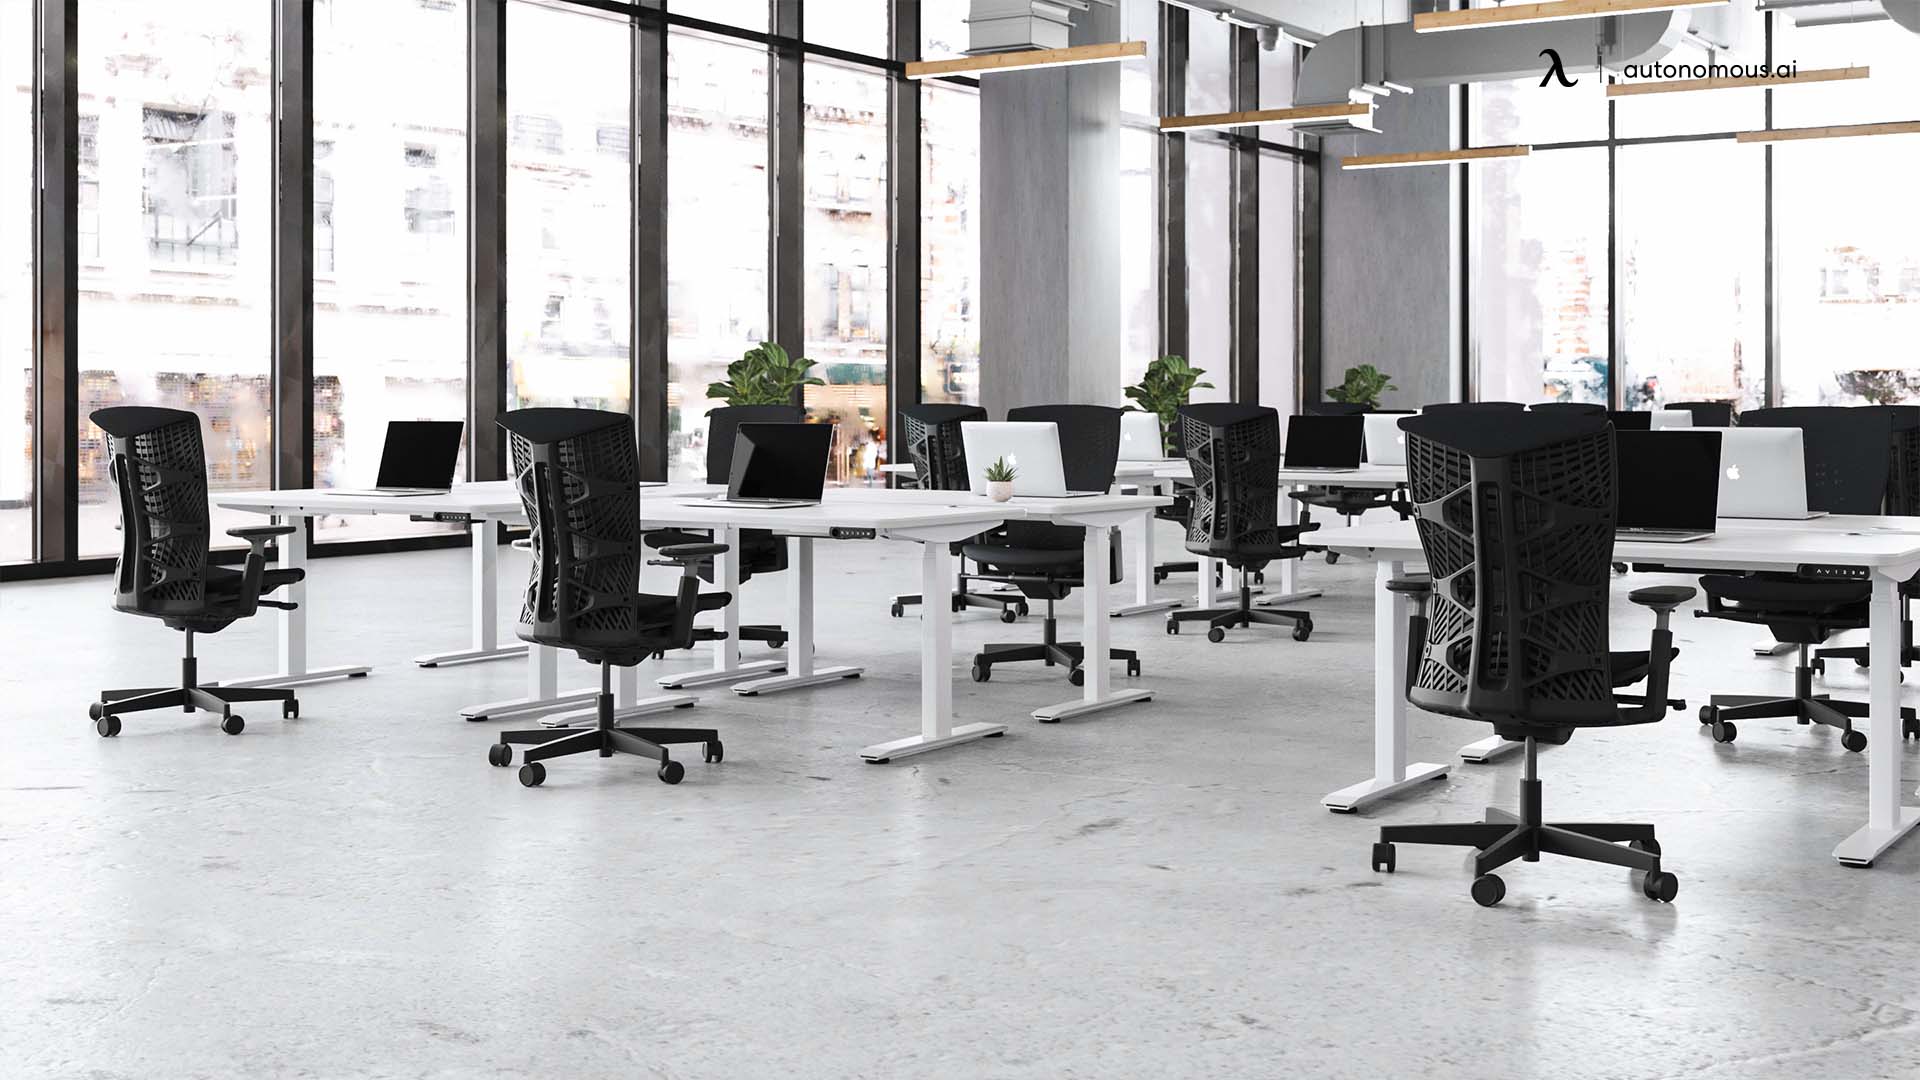 Benefits of Buying an Office Chair in Bulk